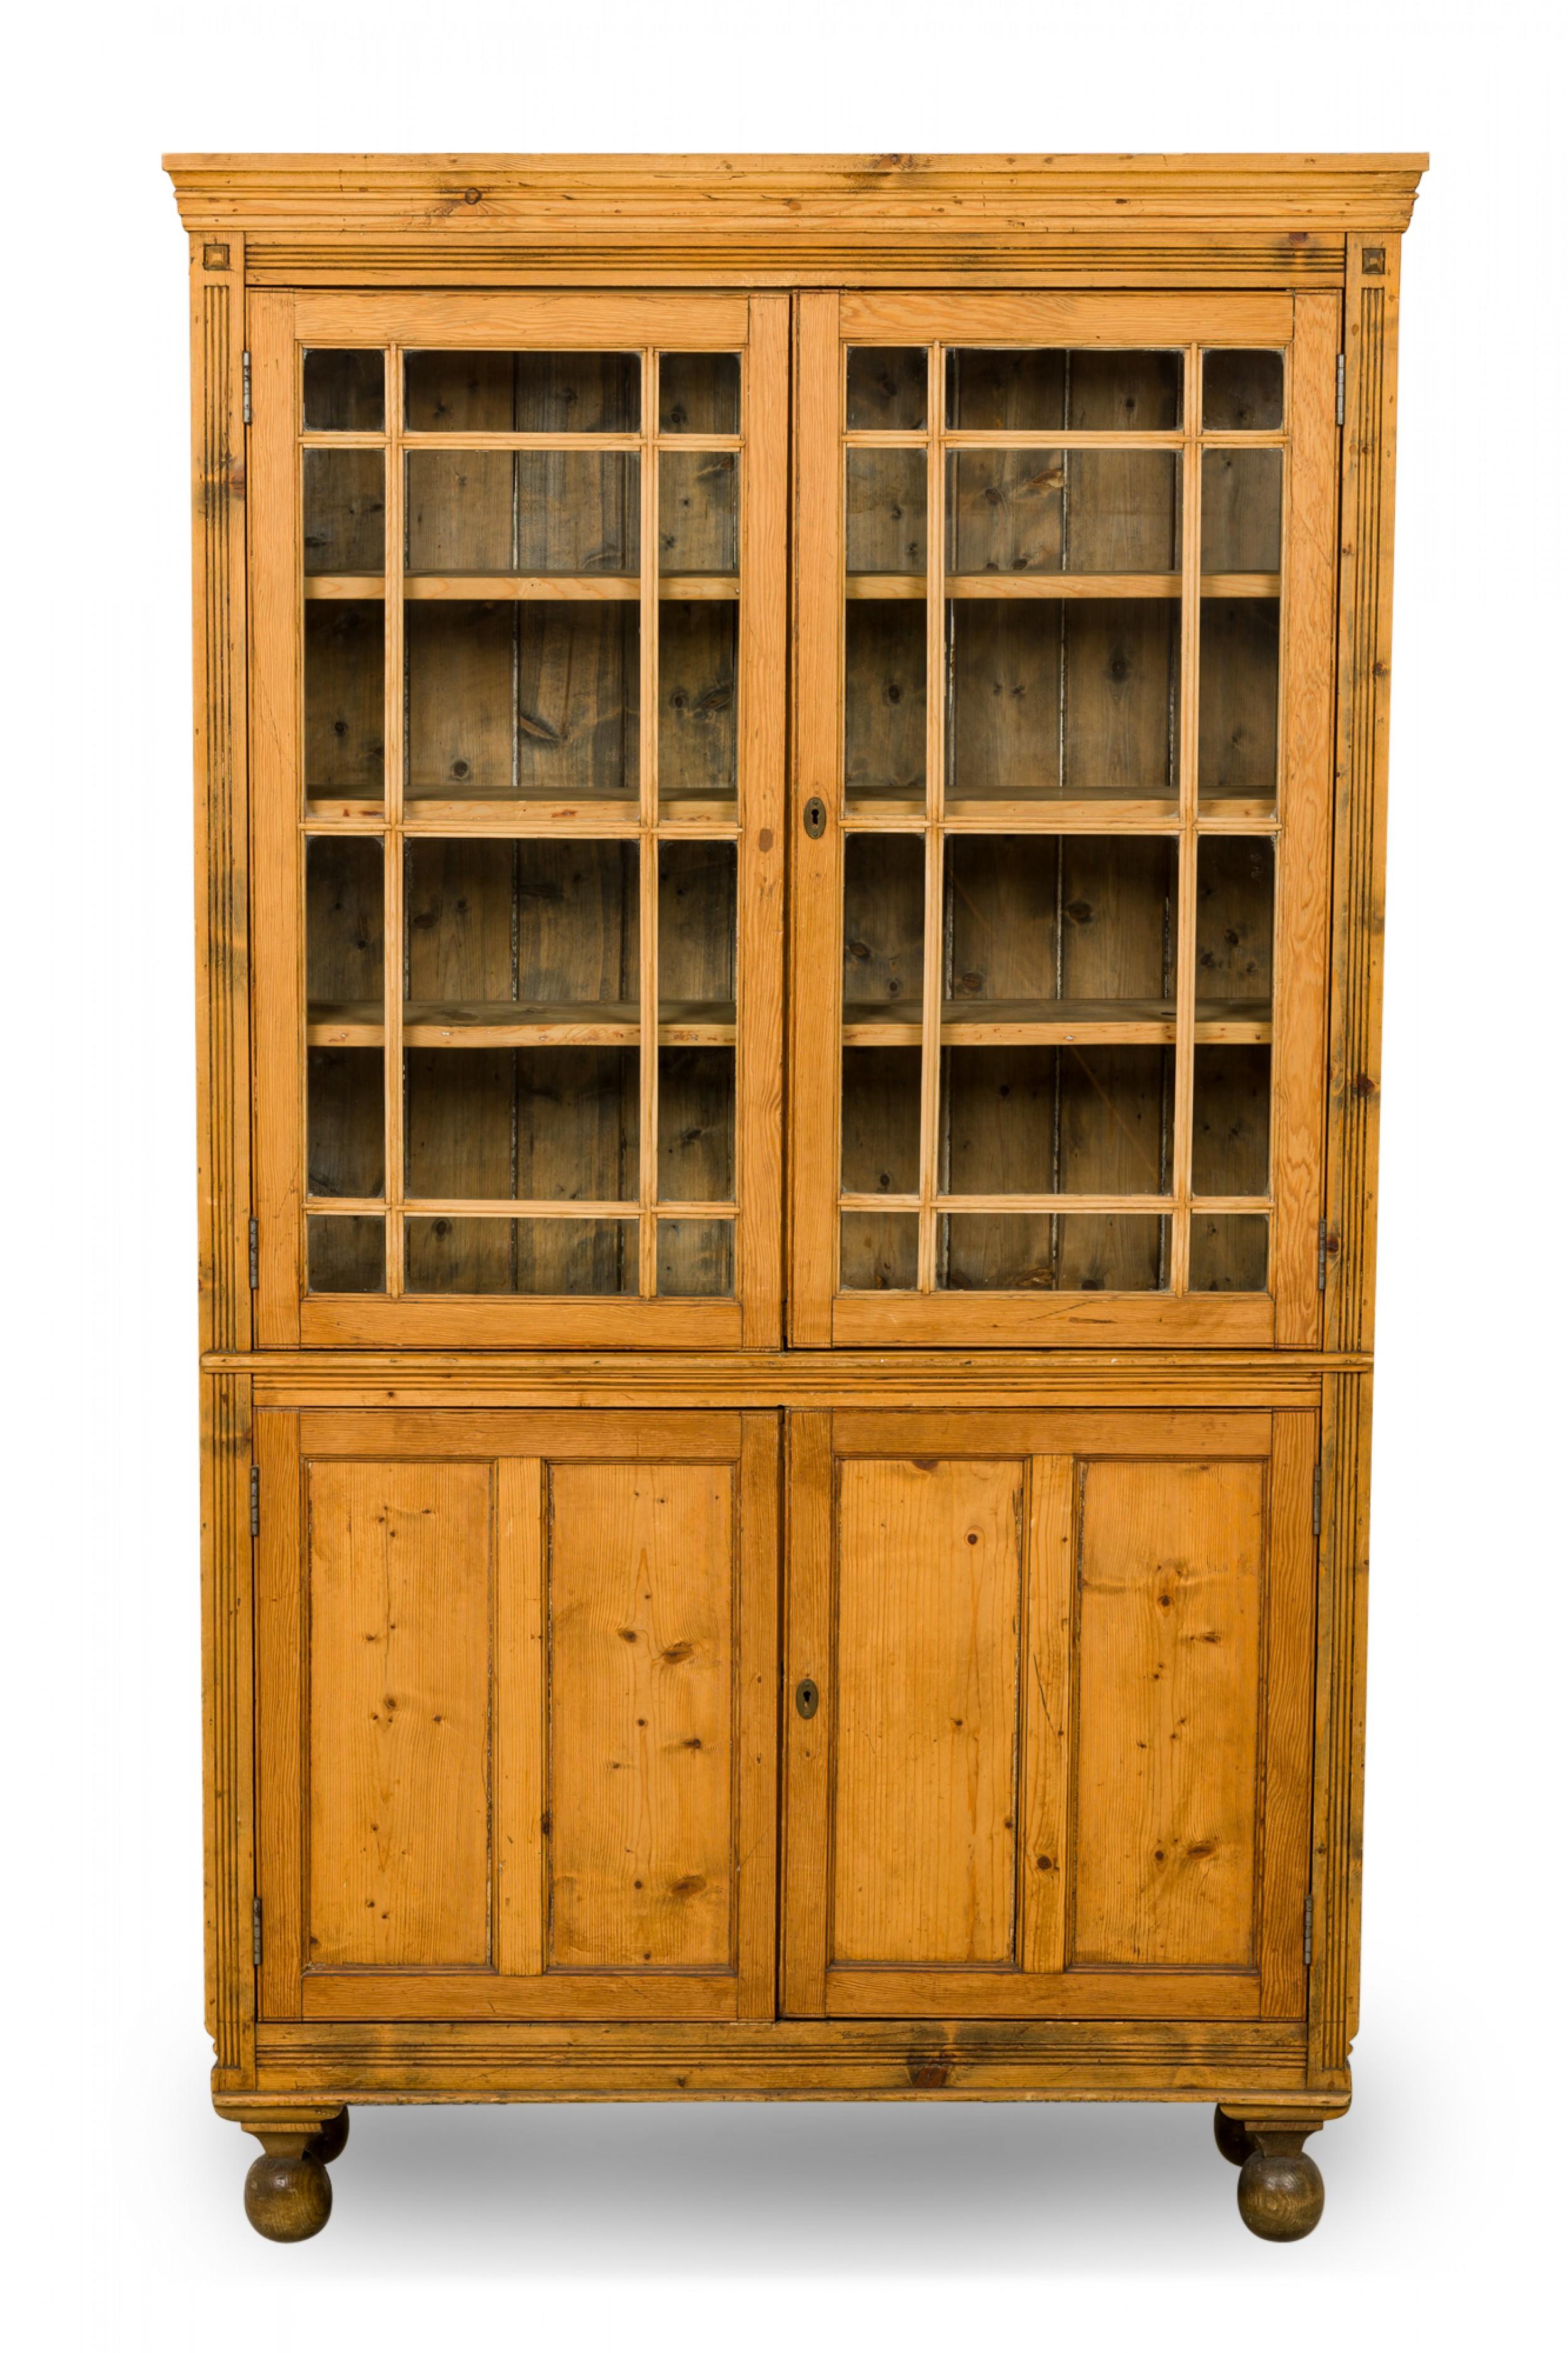 English mid-century breakfront pine wood hutch with an upper cabinet containing three wooden shelves with breakfront glass doors above a lower enclosed two door cabinet compartment containing two shelves, with carved fluted and medallion detail